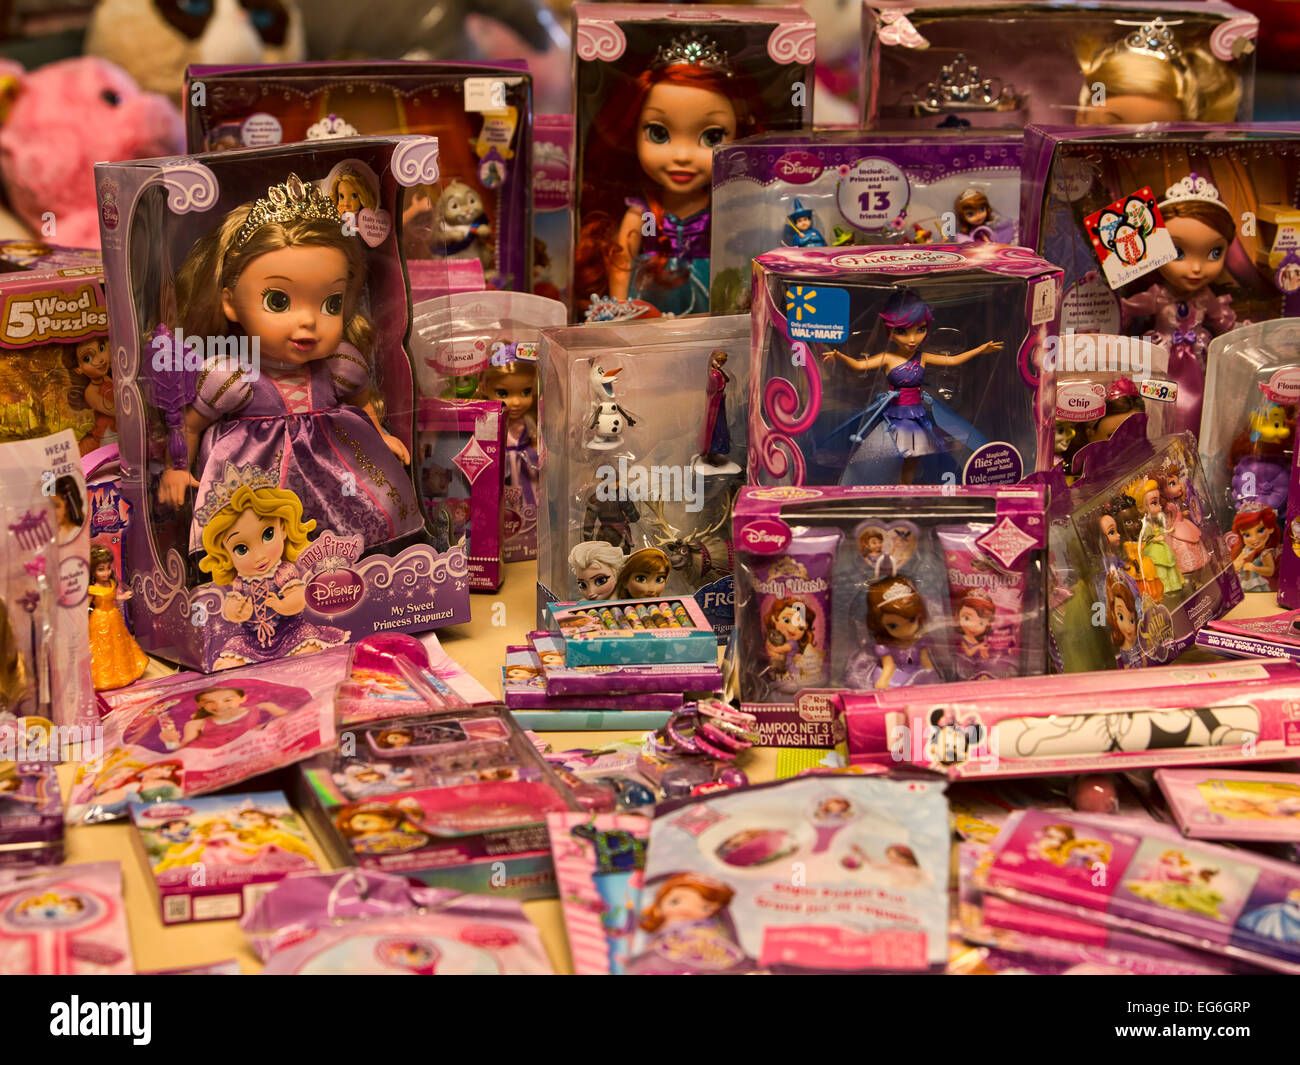 Christmas gifts, toys, and dolls Stock Photo